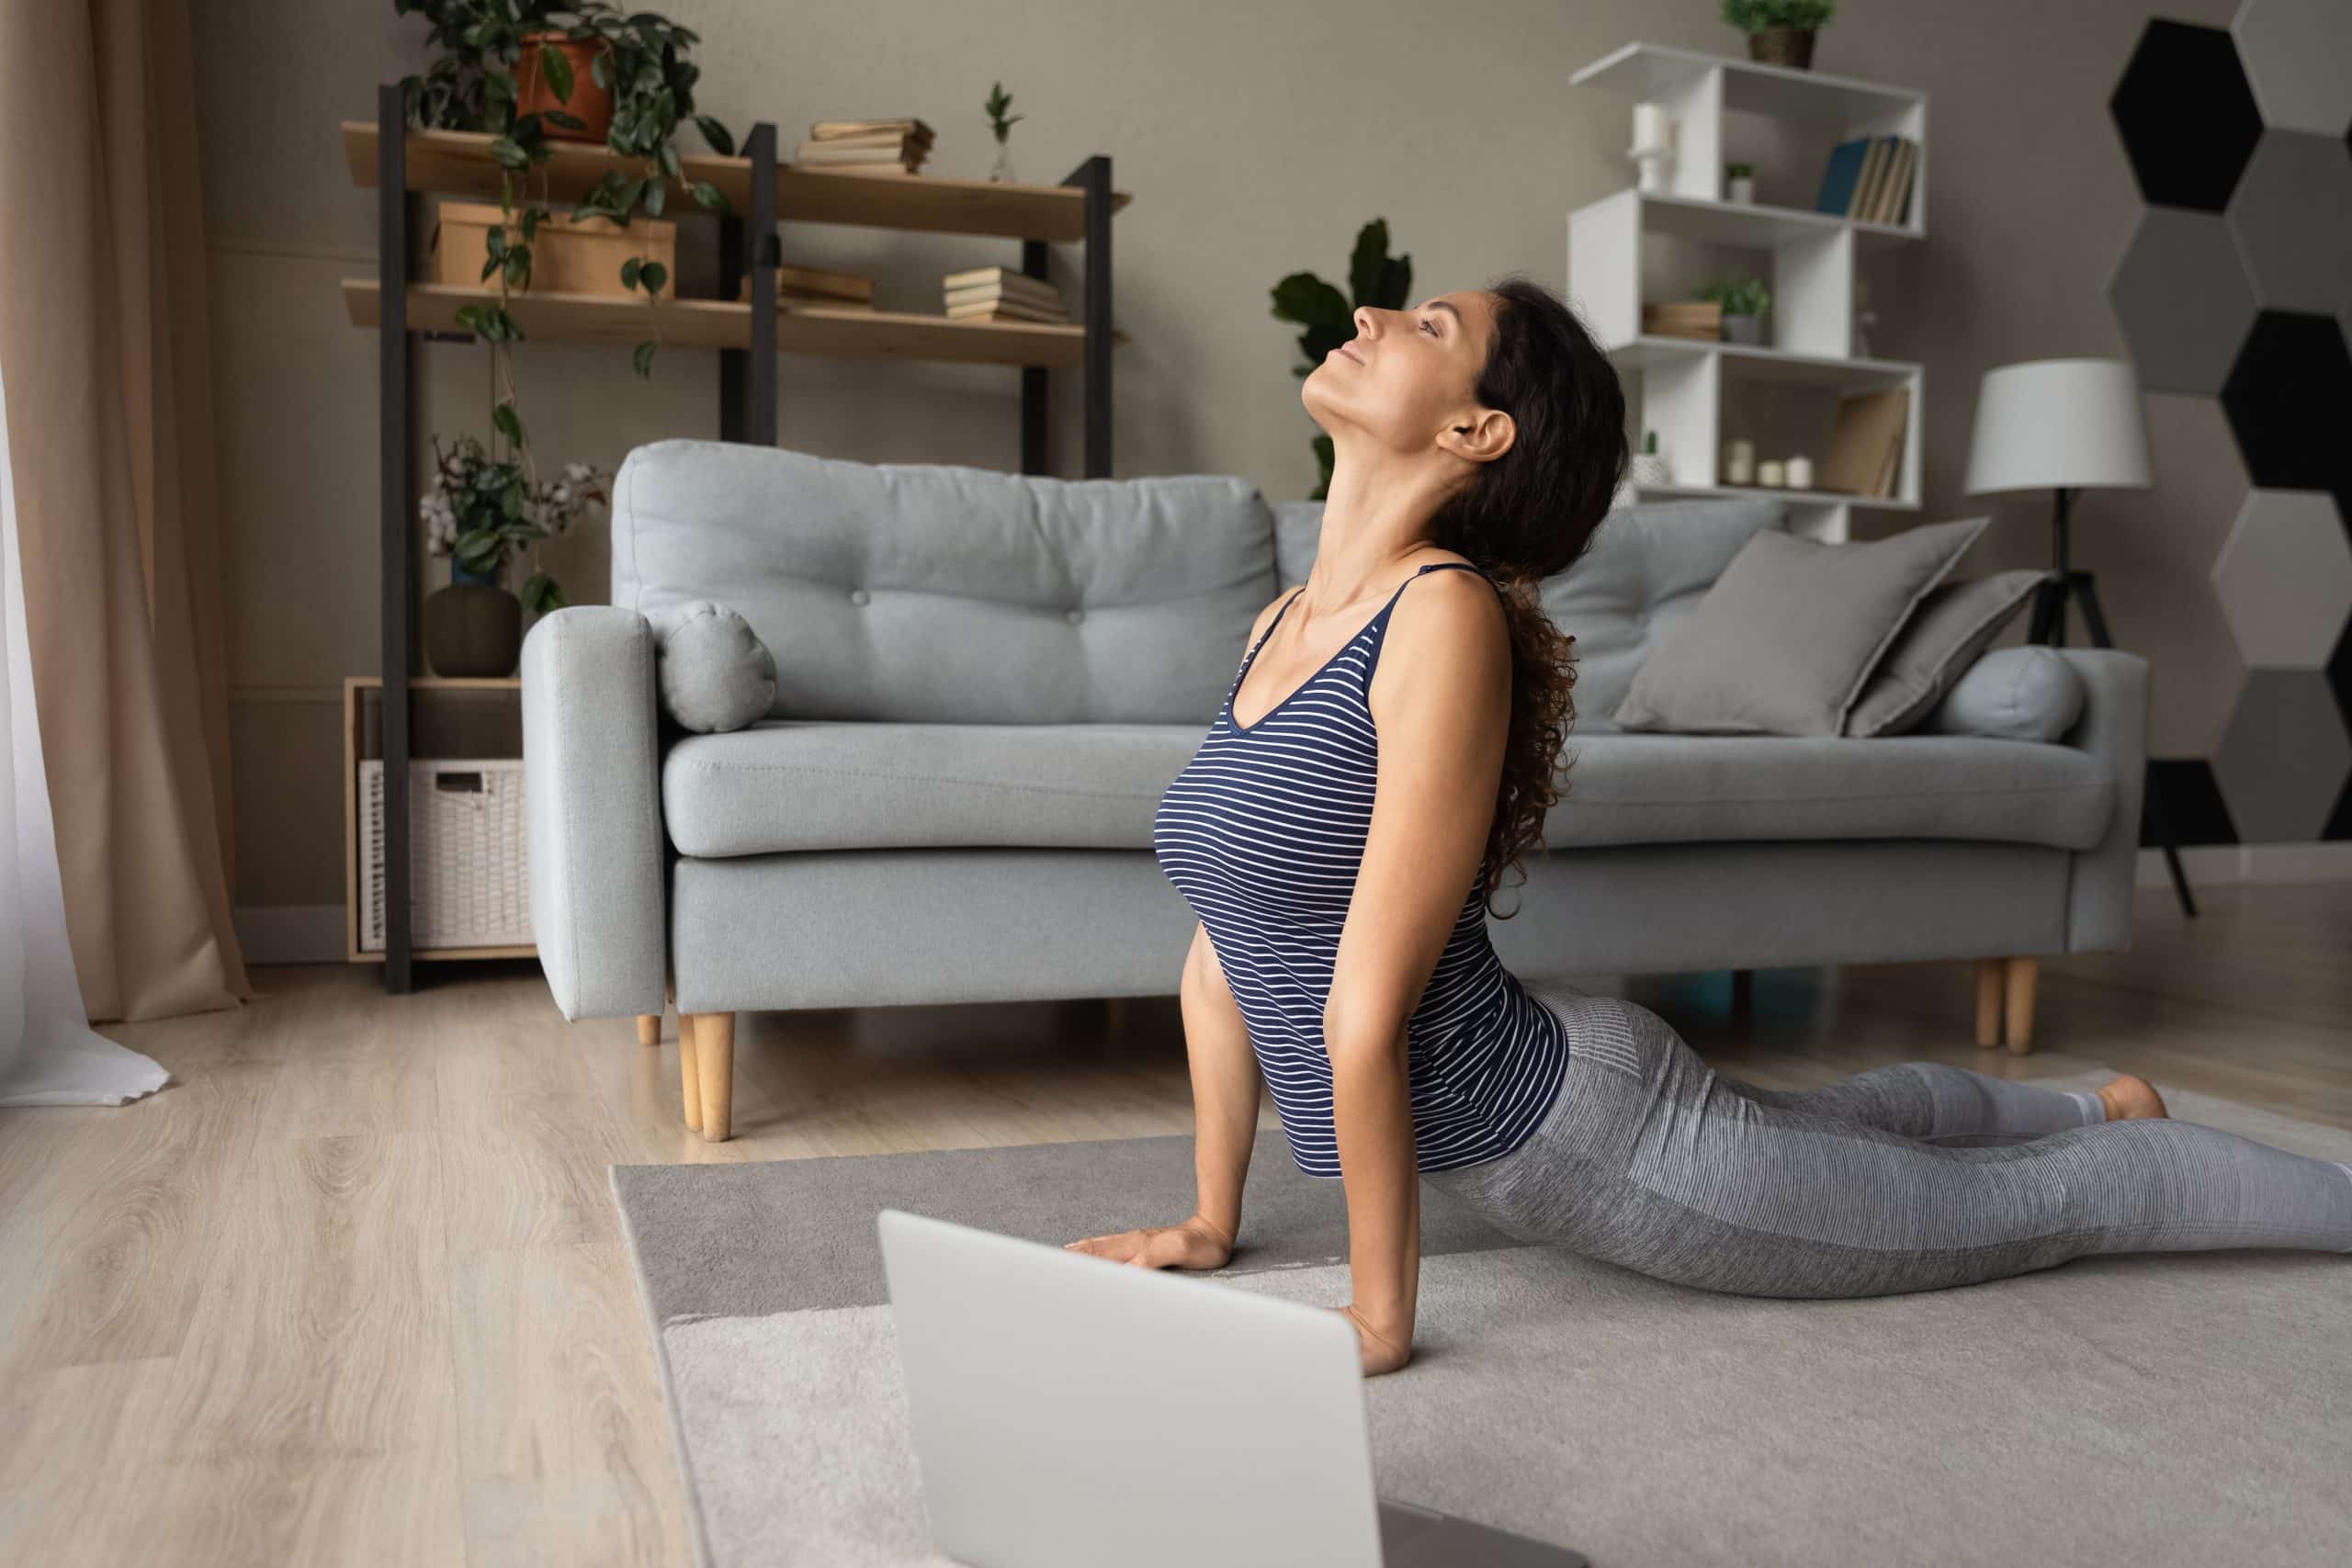 5 Chair Yoga Poses For Strength And Flexibility - BetterMe